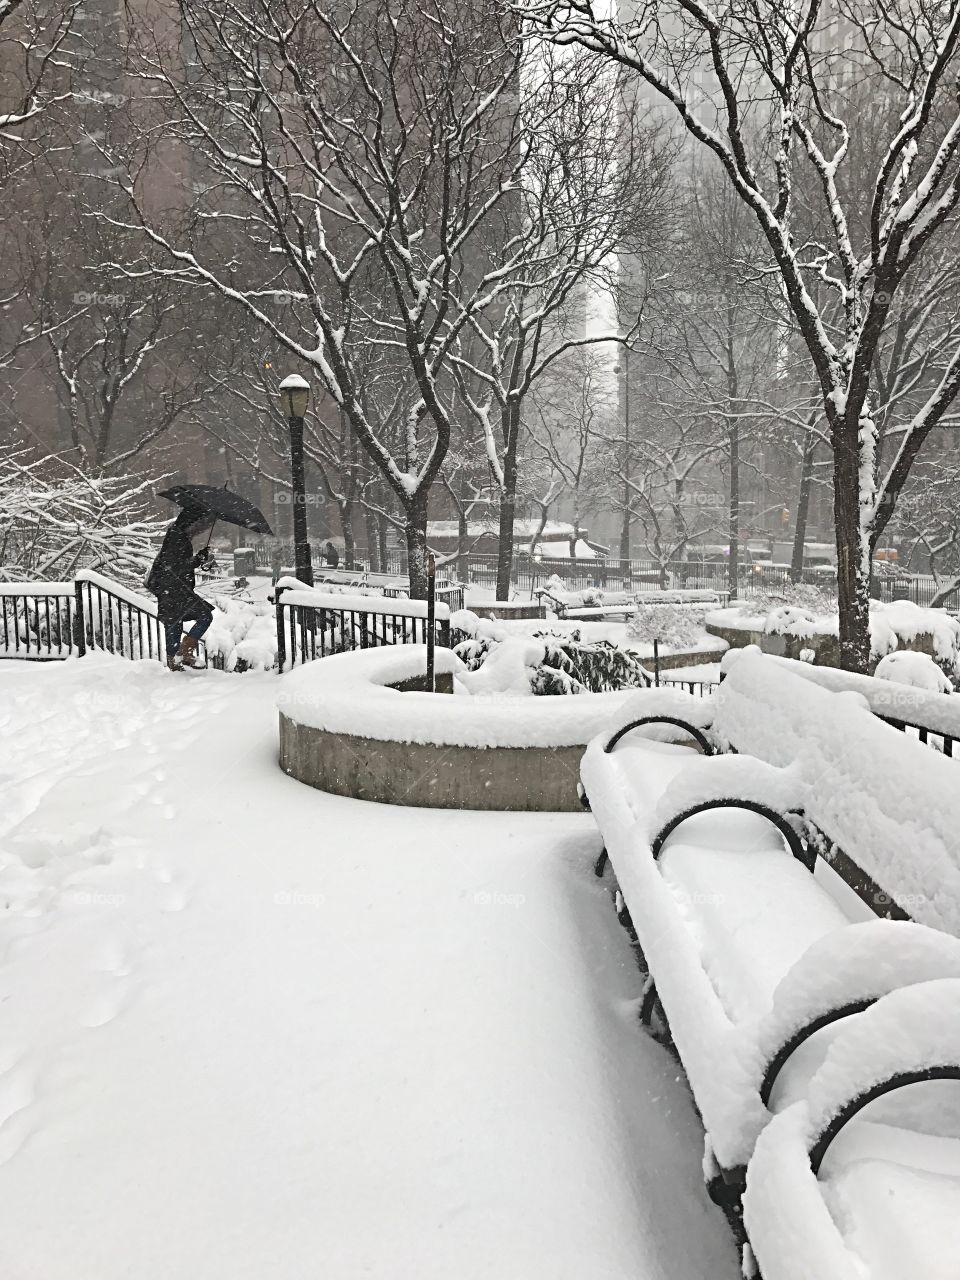 A person with an umbrella walking down steps in a city park during a snow storm